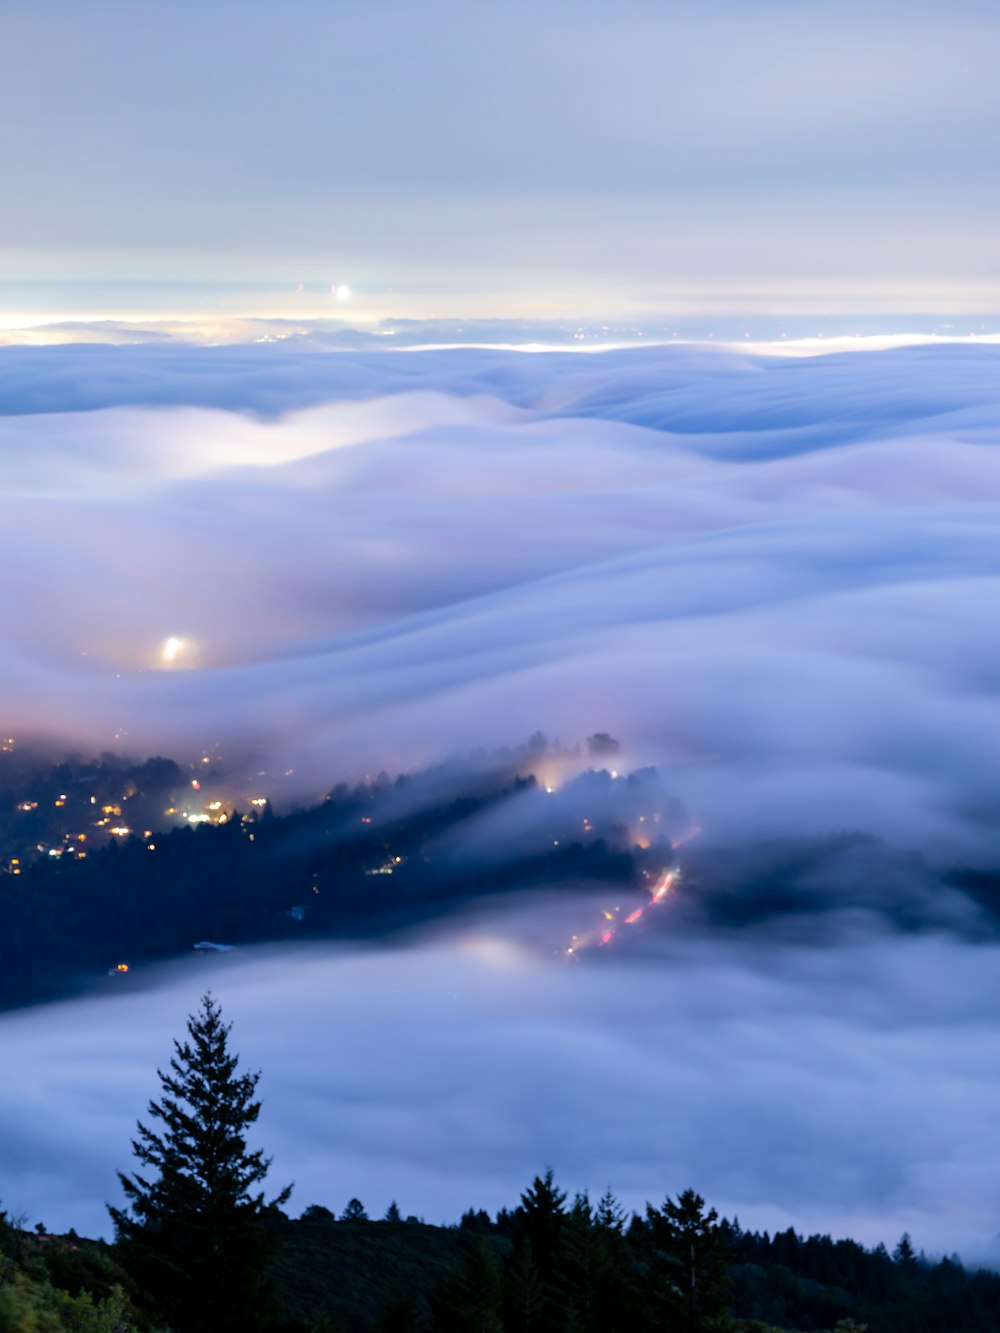 a view of a city in the distance from above the clouds